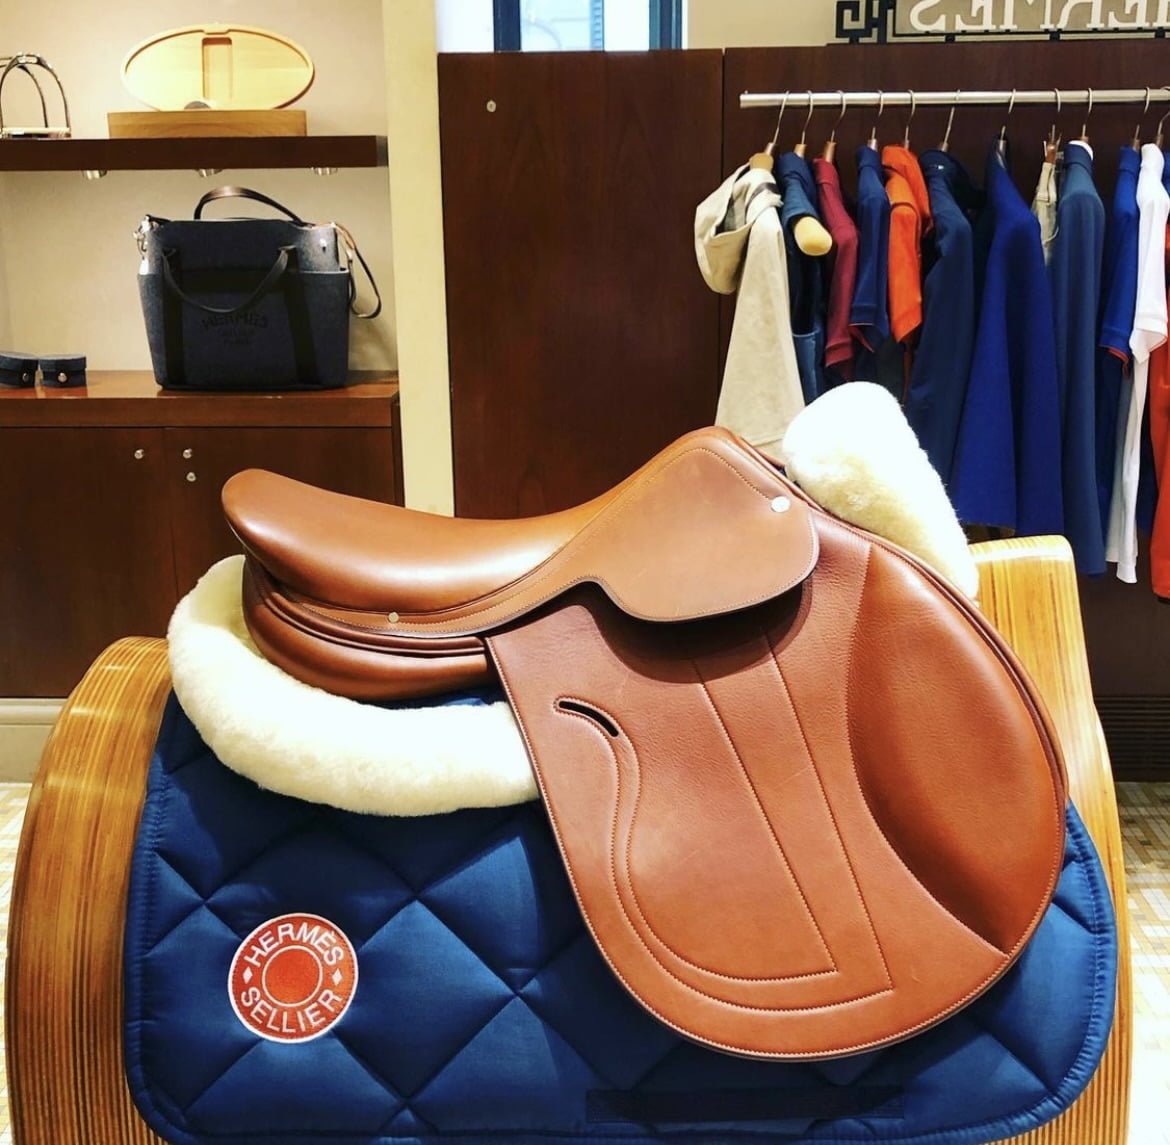 How Hermès rejects are bagging purses despite snooty shops